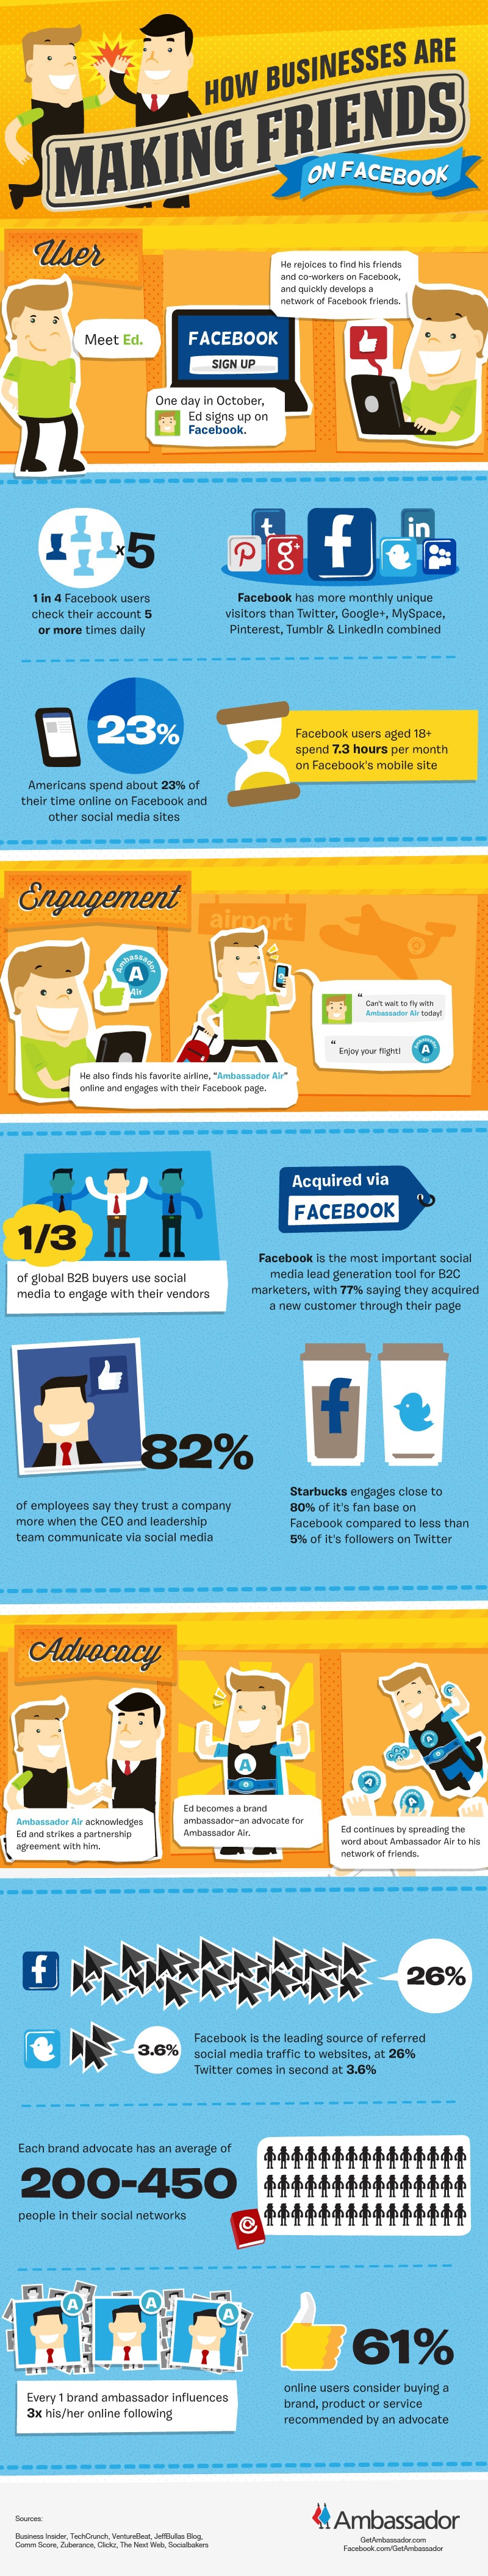 Making More Friends On Facebook As A Business [Infographic]